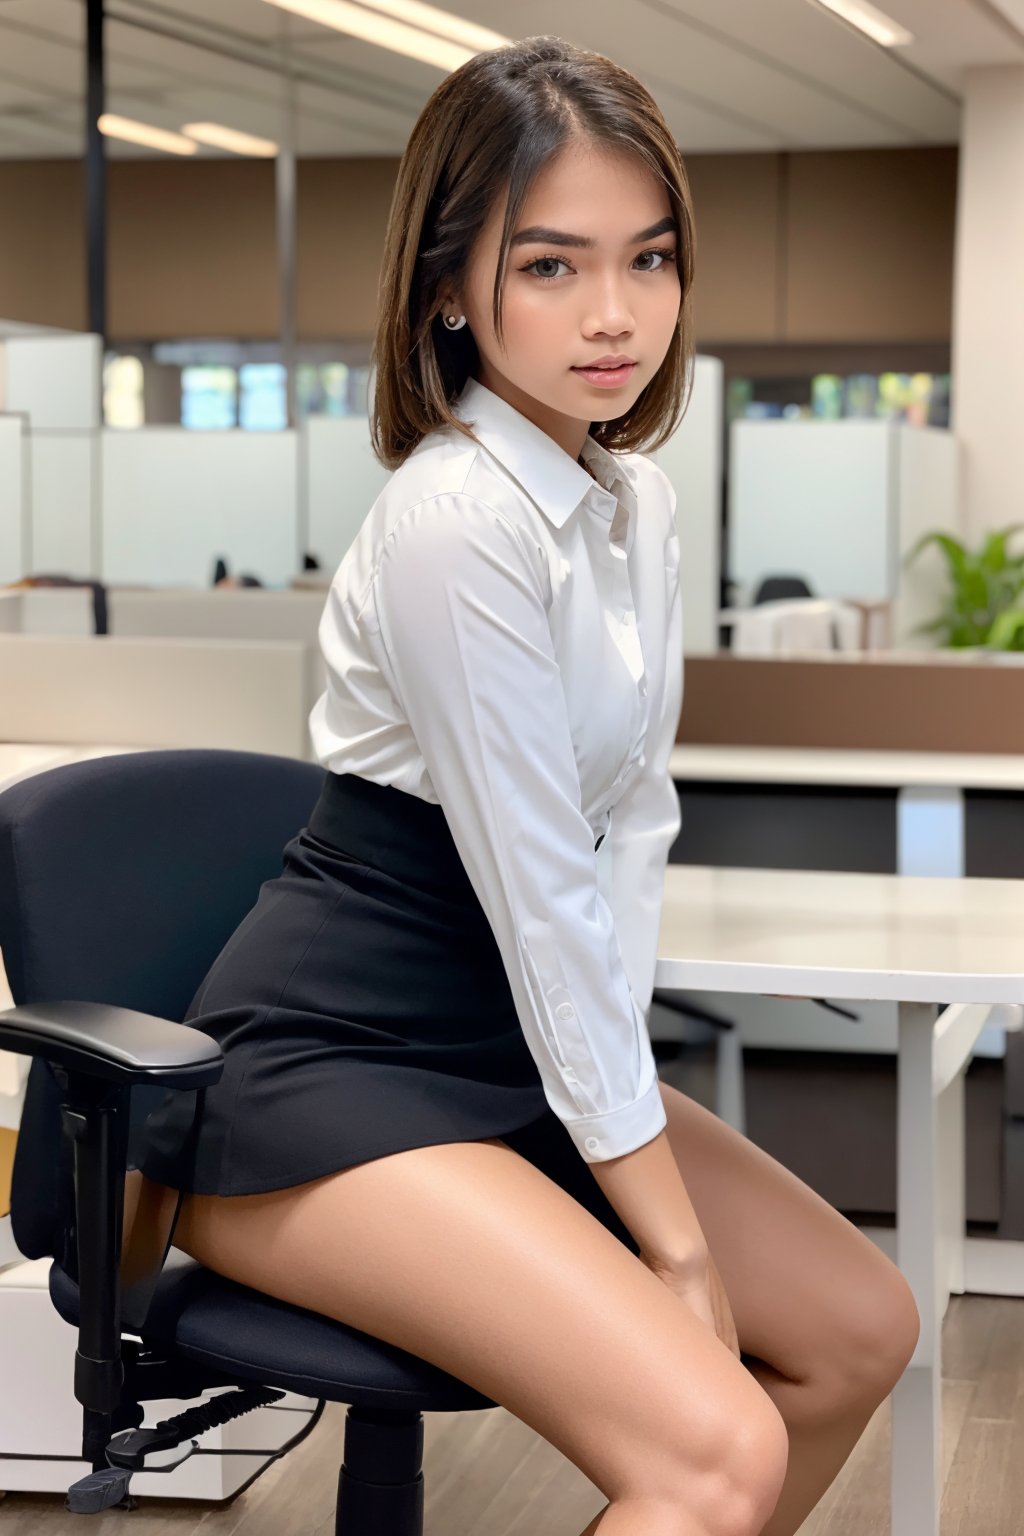 1girl, solo, young Filipina model, office shirt, mini skirt, realistic, detailed face, office. sitting on chair, close up view. ,Masterpiece